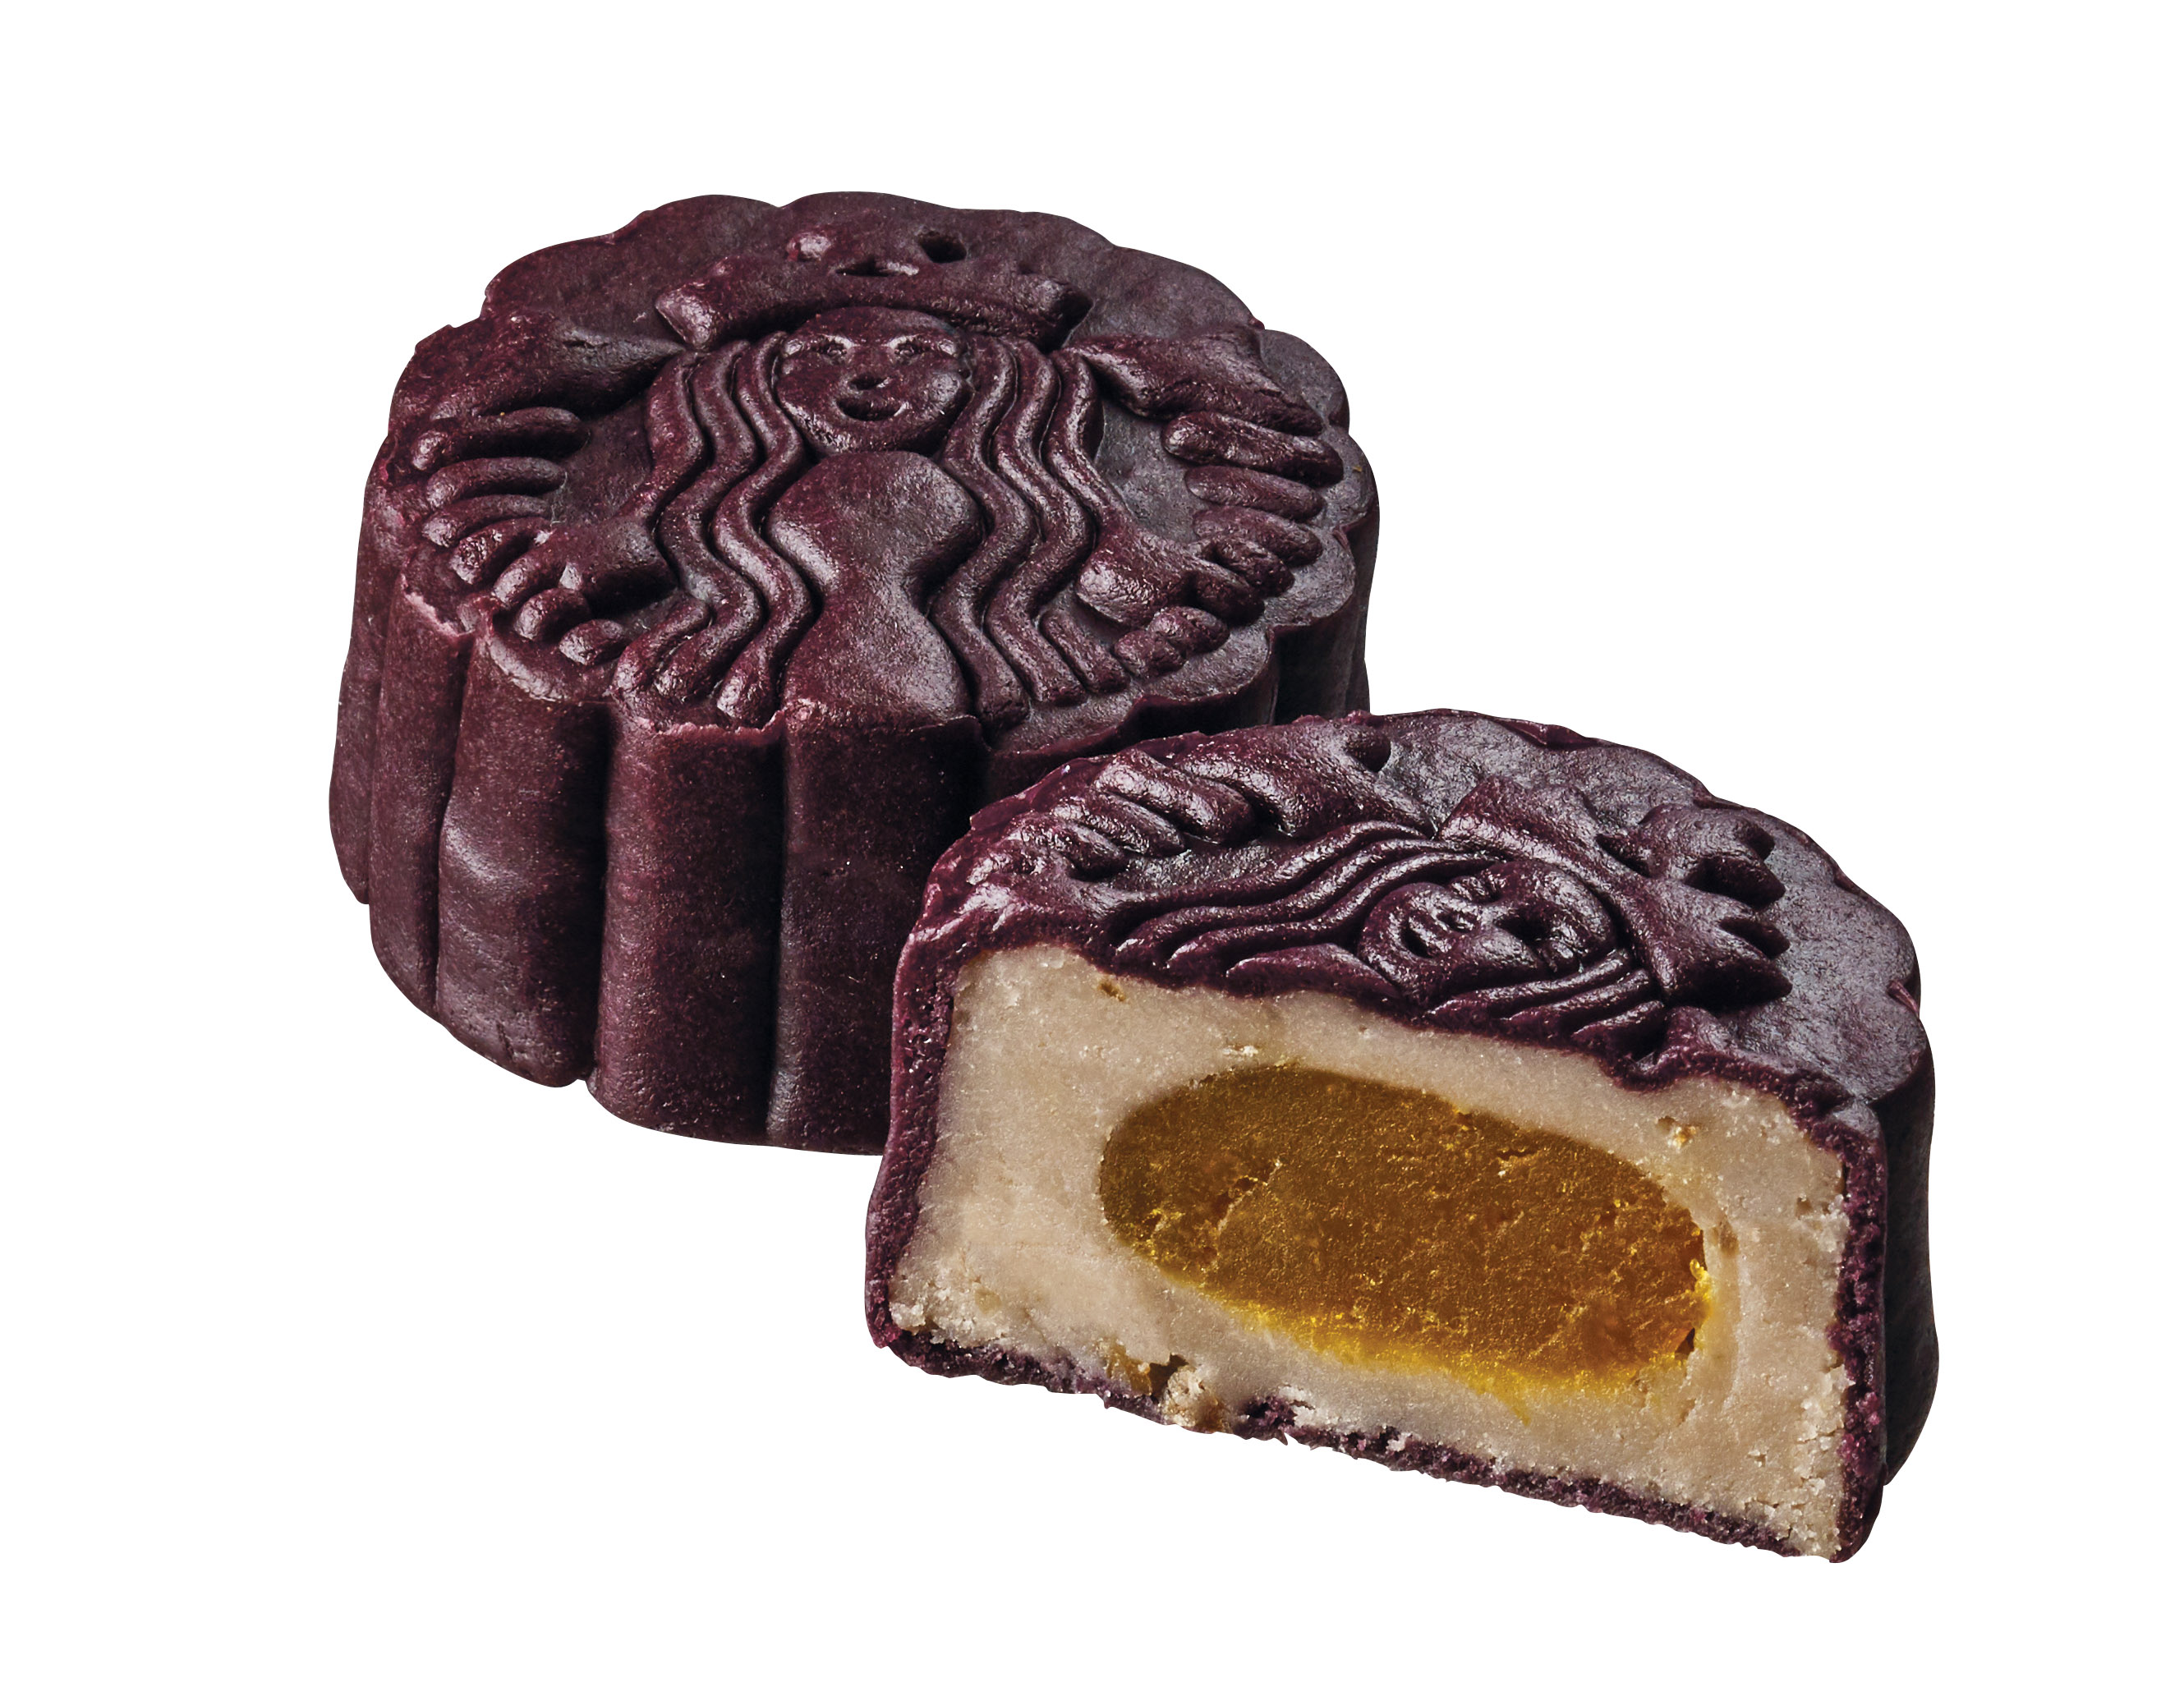 Starbucks welcomes Mid-Autumn Festival with new mooncakes, merchandise, and a 15% discount - Alvinology